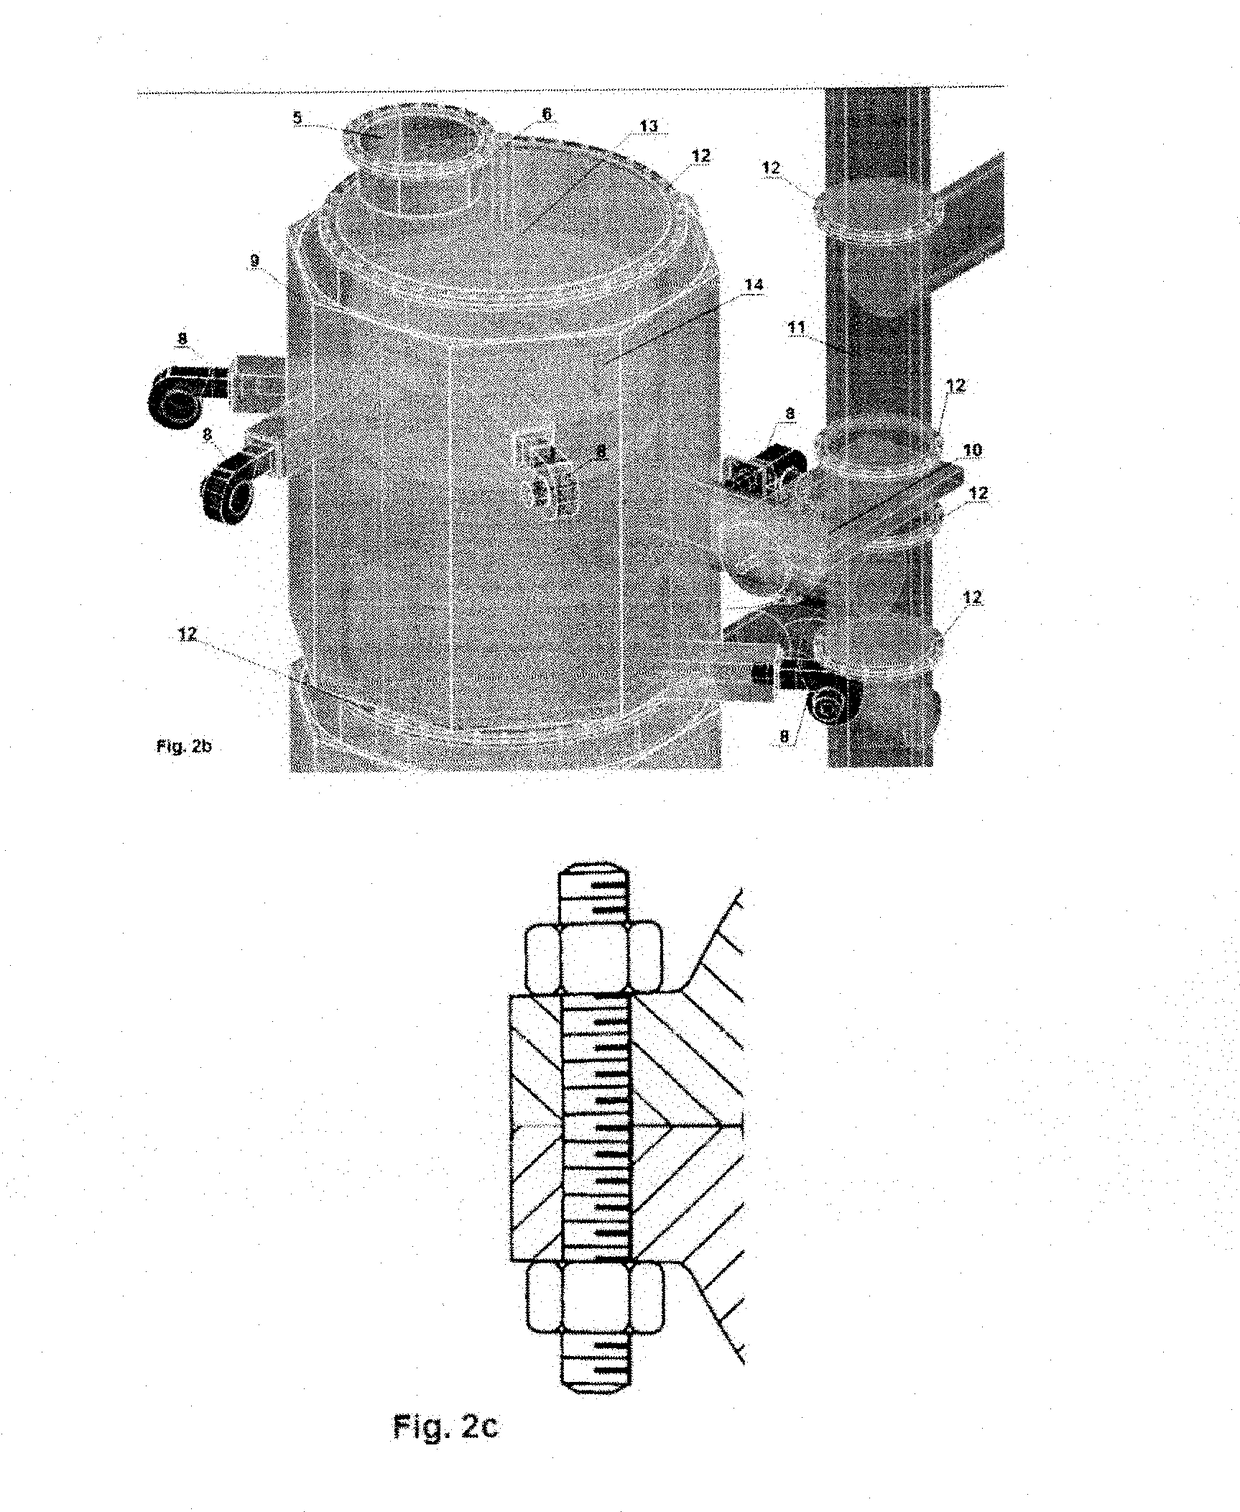 Pyrolysis reactor with optimized reaction sequencing